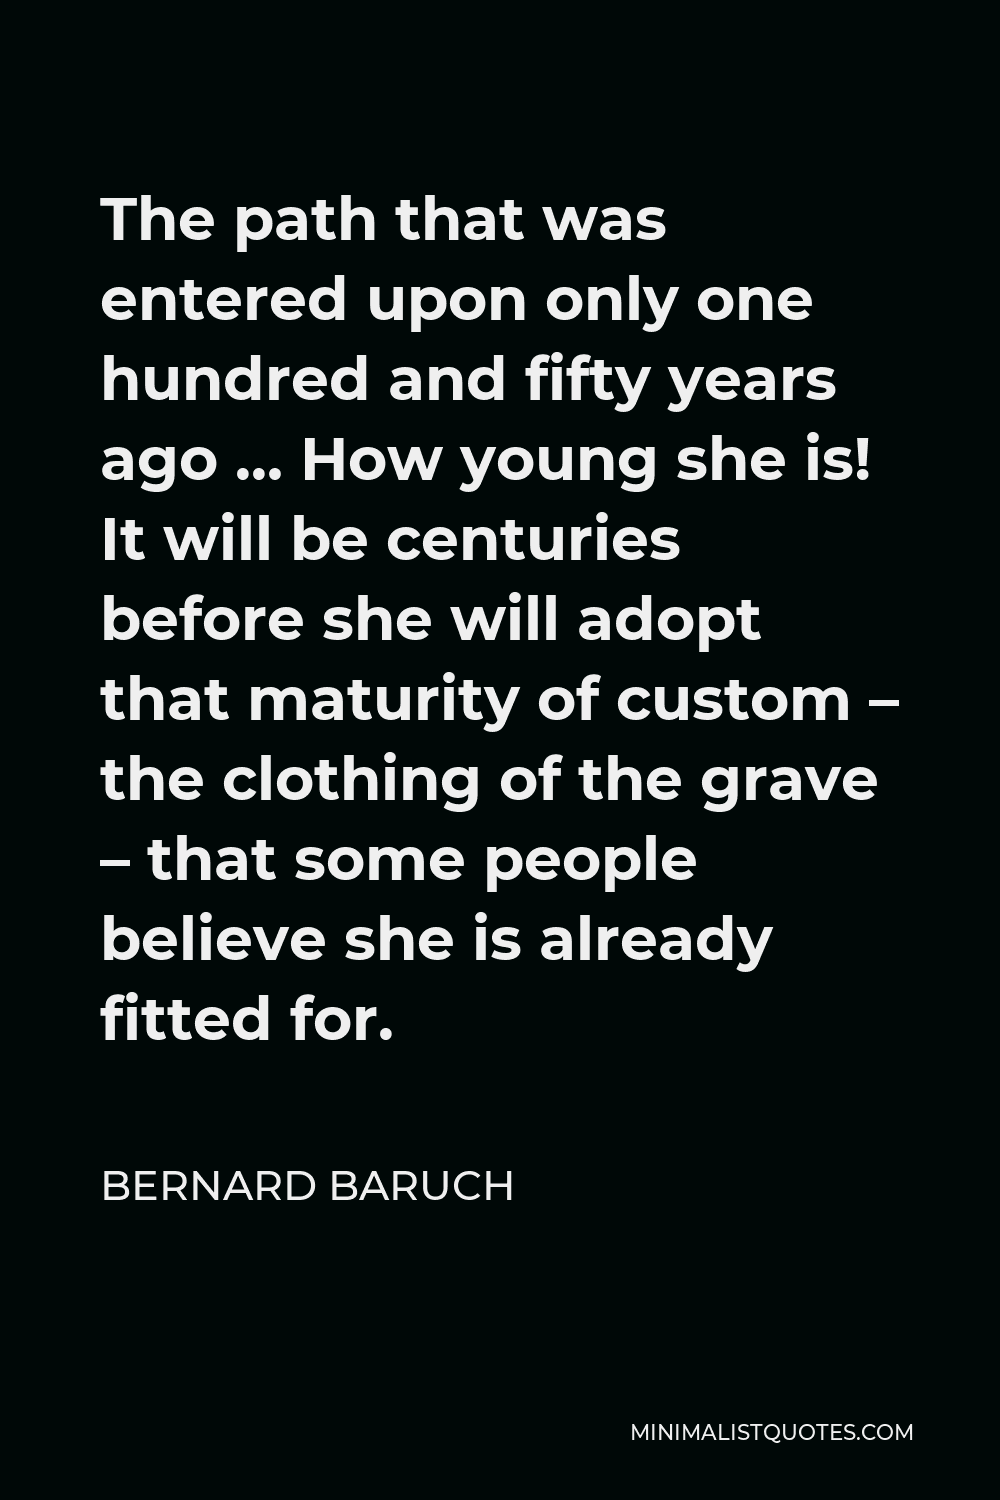 Bernard Baruch Quote - The path that was entered upon only one hundred and fifty years ago … How young she is! It will be centuries before she will adopt that maturity of custom – the clothing of the grave – that some people believe she is already fitted for.